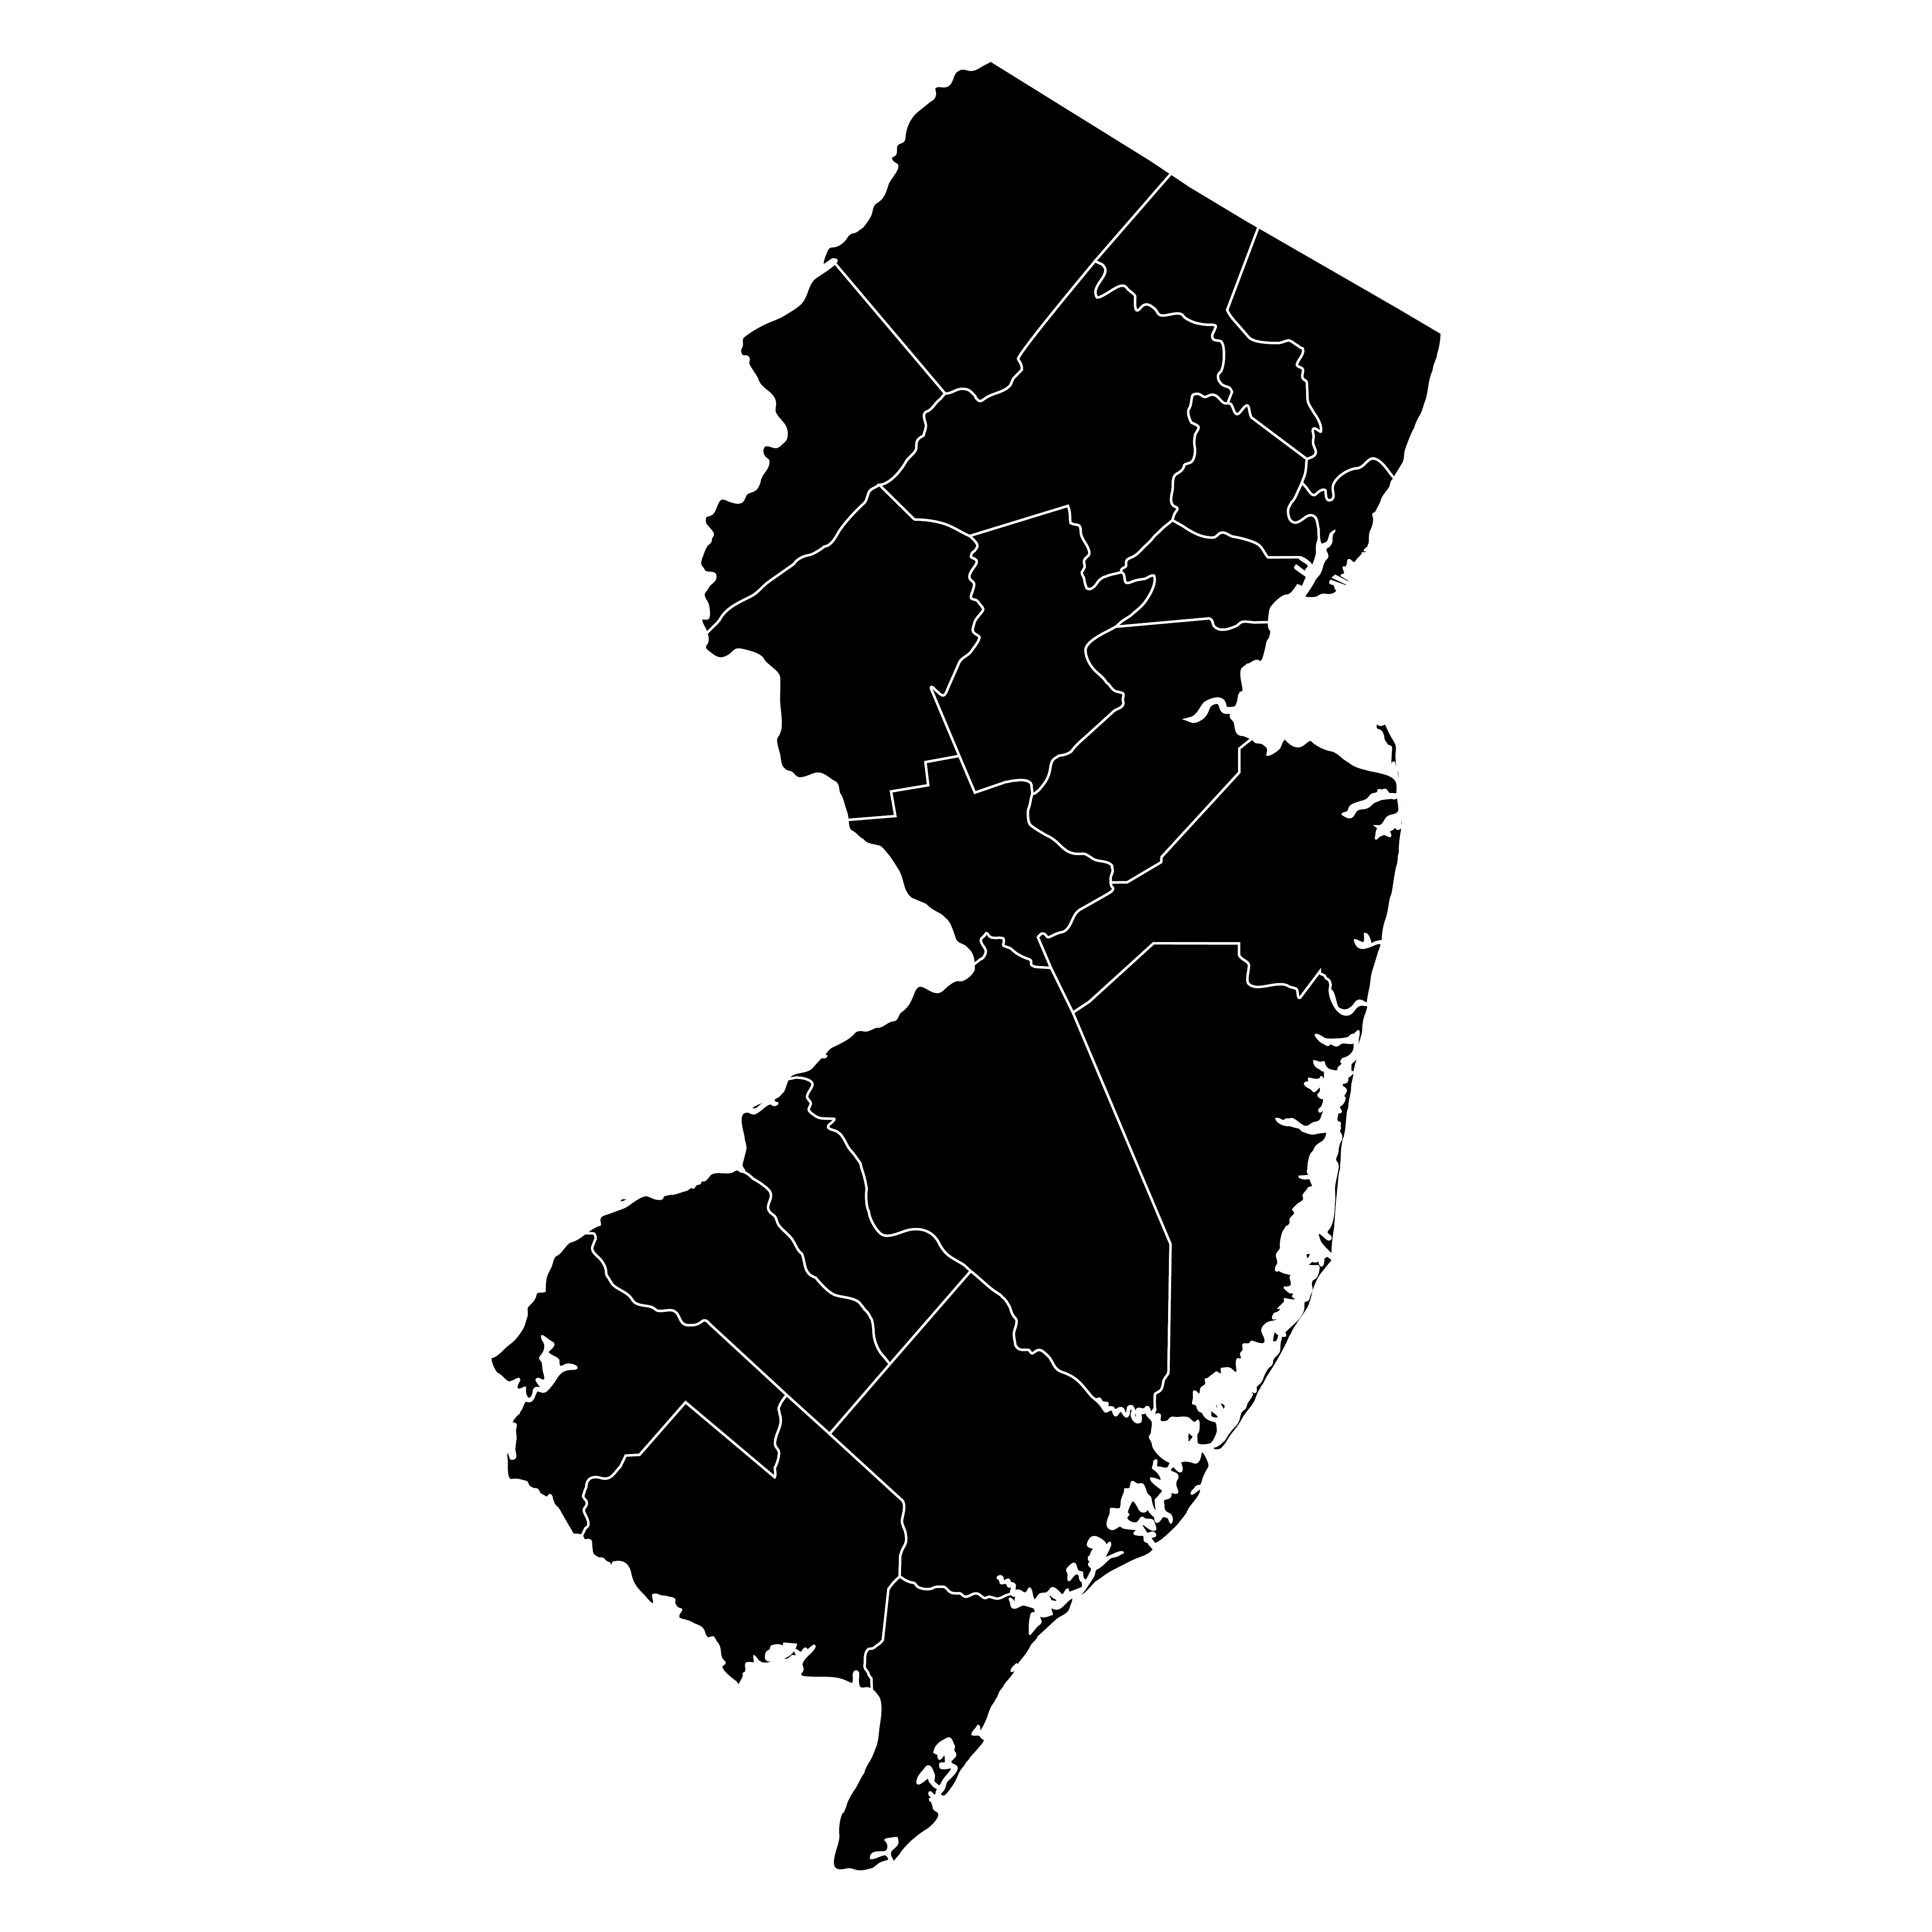 A map of New Jersey